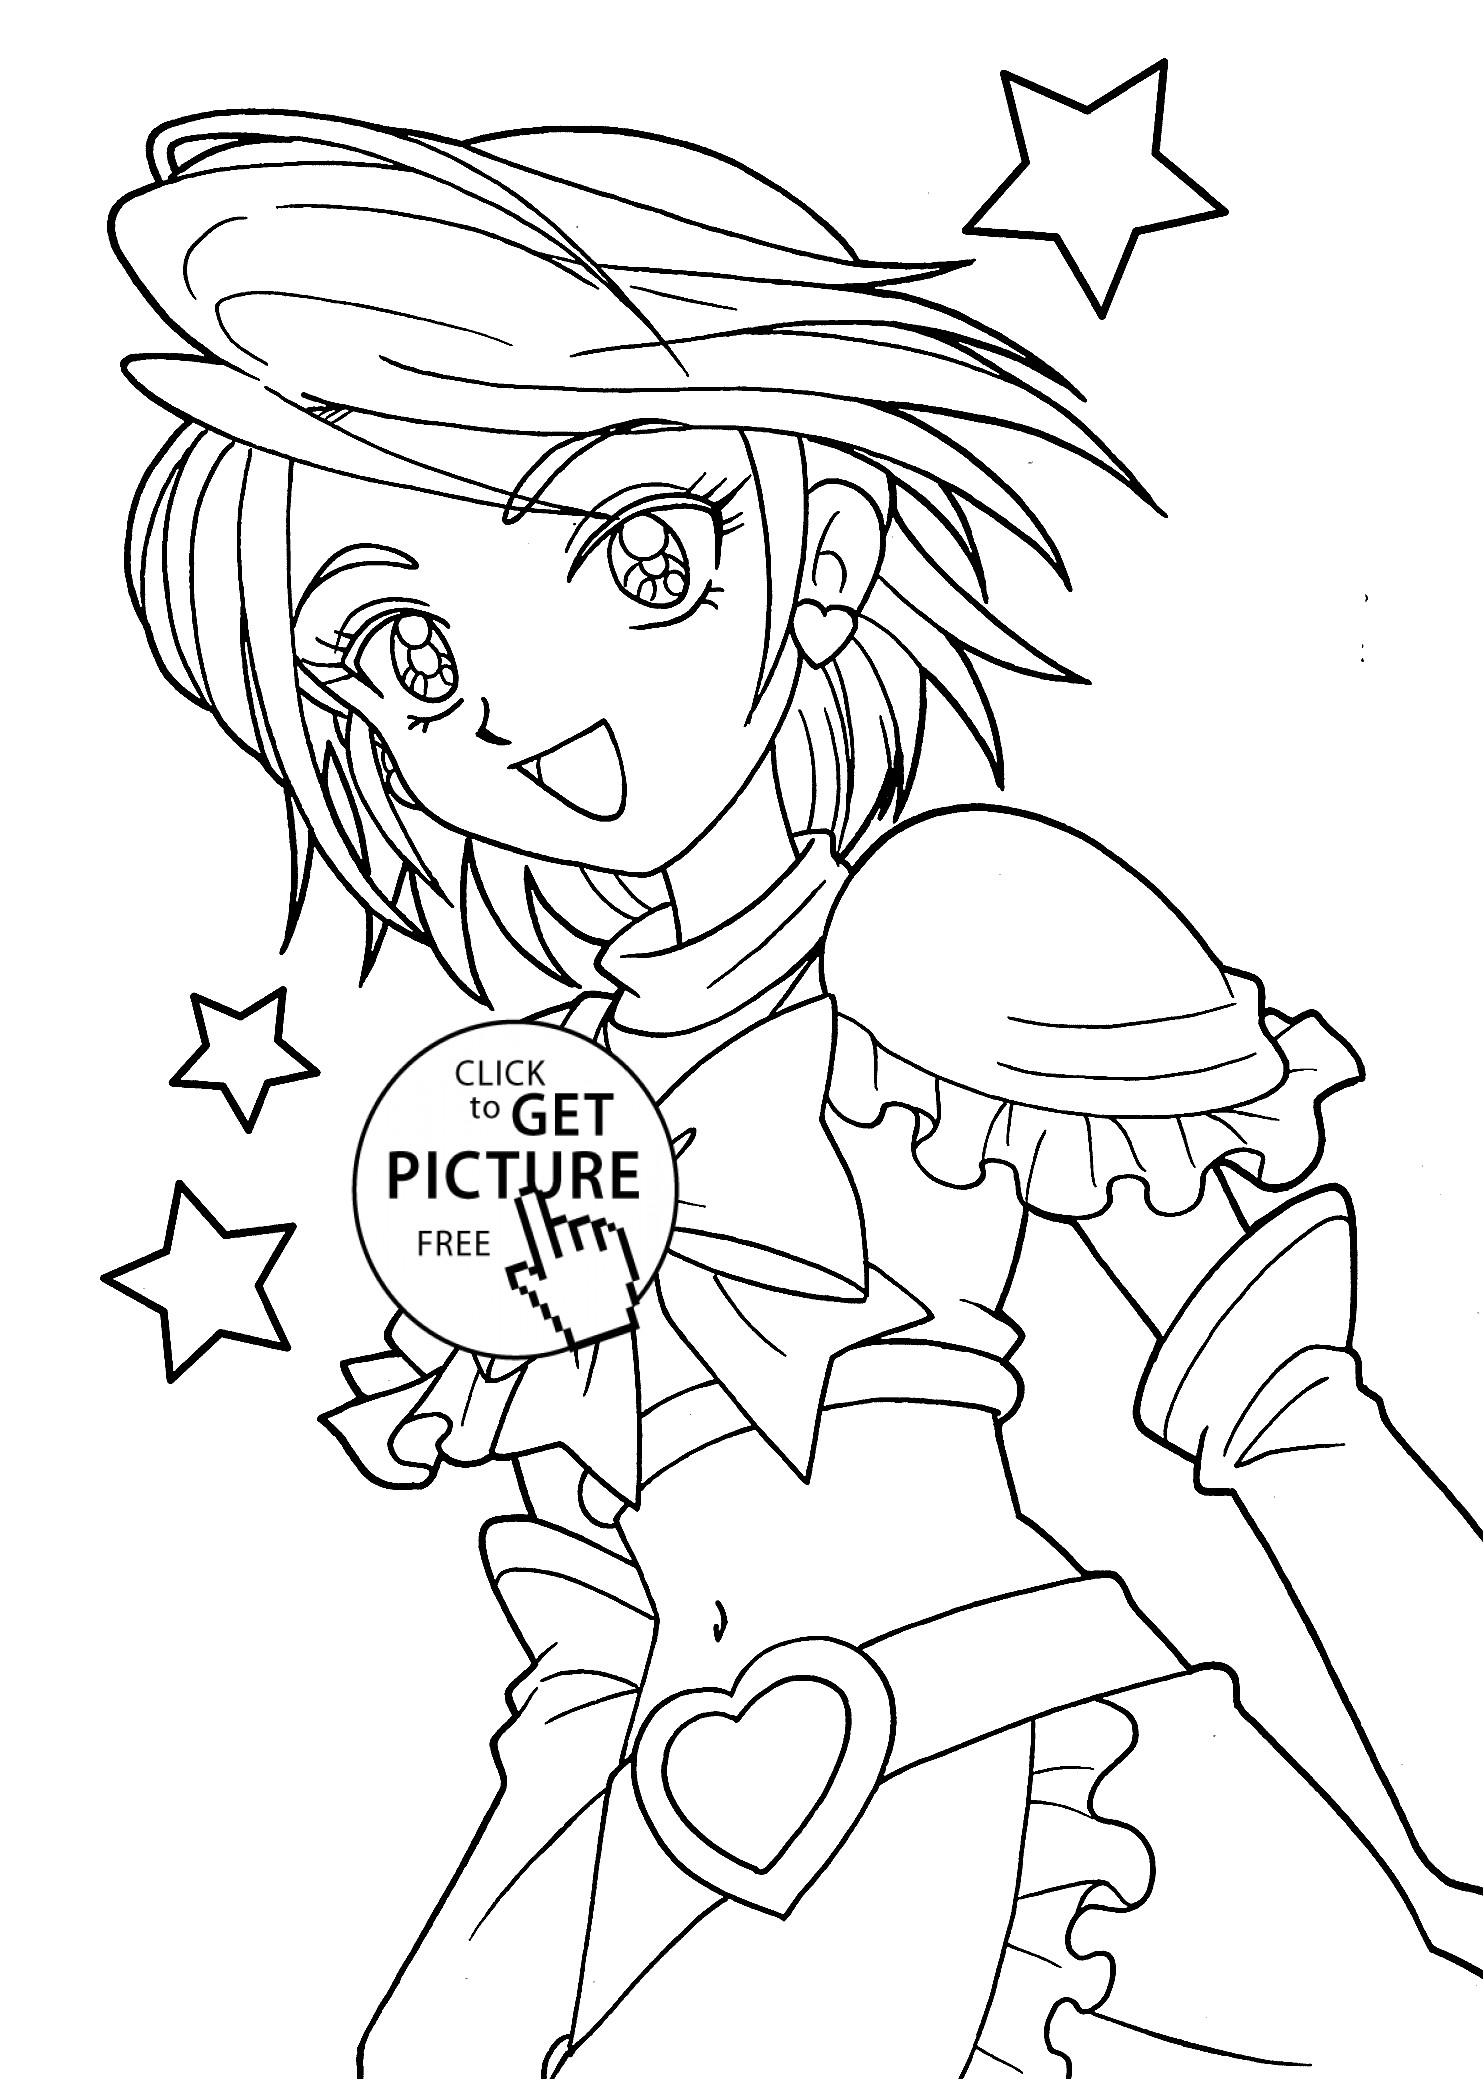 Coloring Pages To Print For Girls
 Cute Anime Girl Coloring Pages to Print